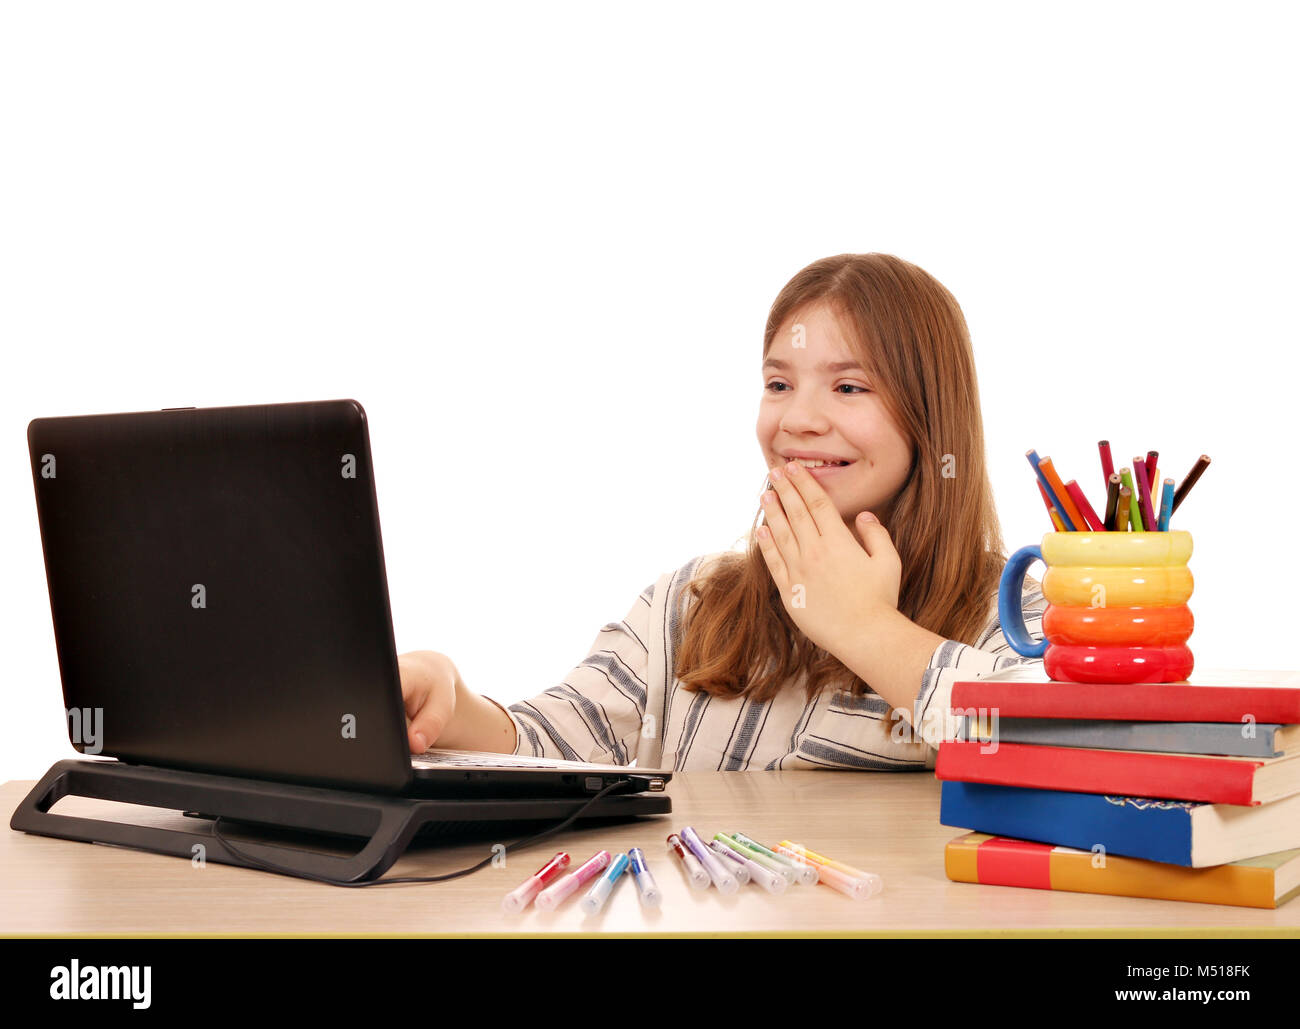 little girl looks at something fun on the laptop Stock Photo